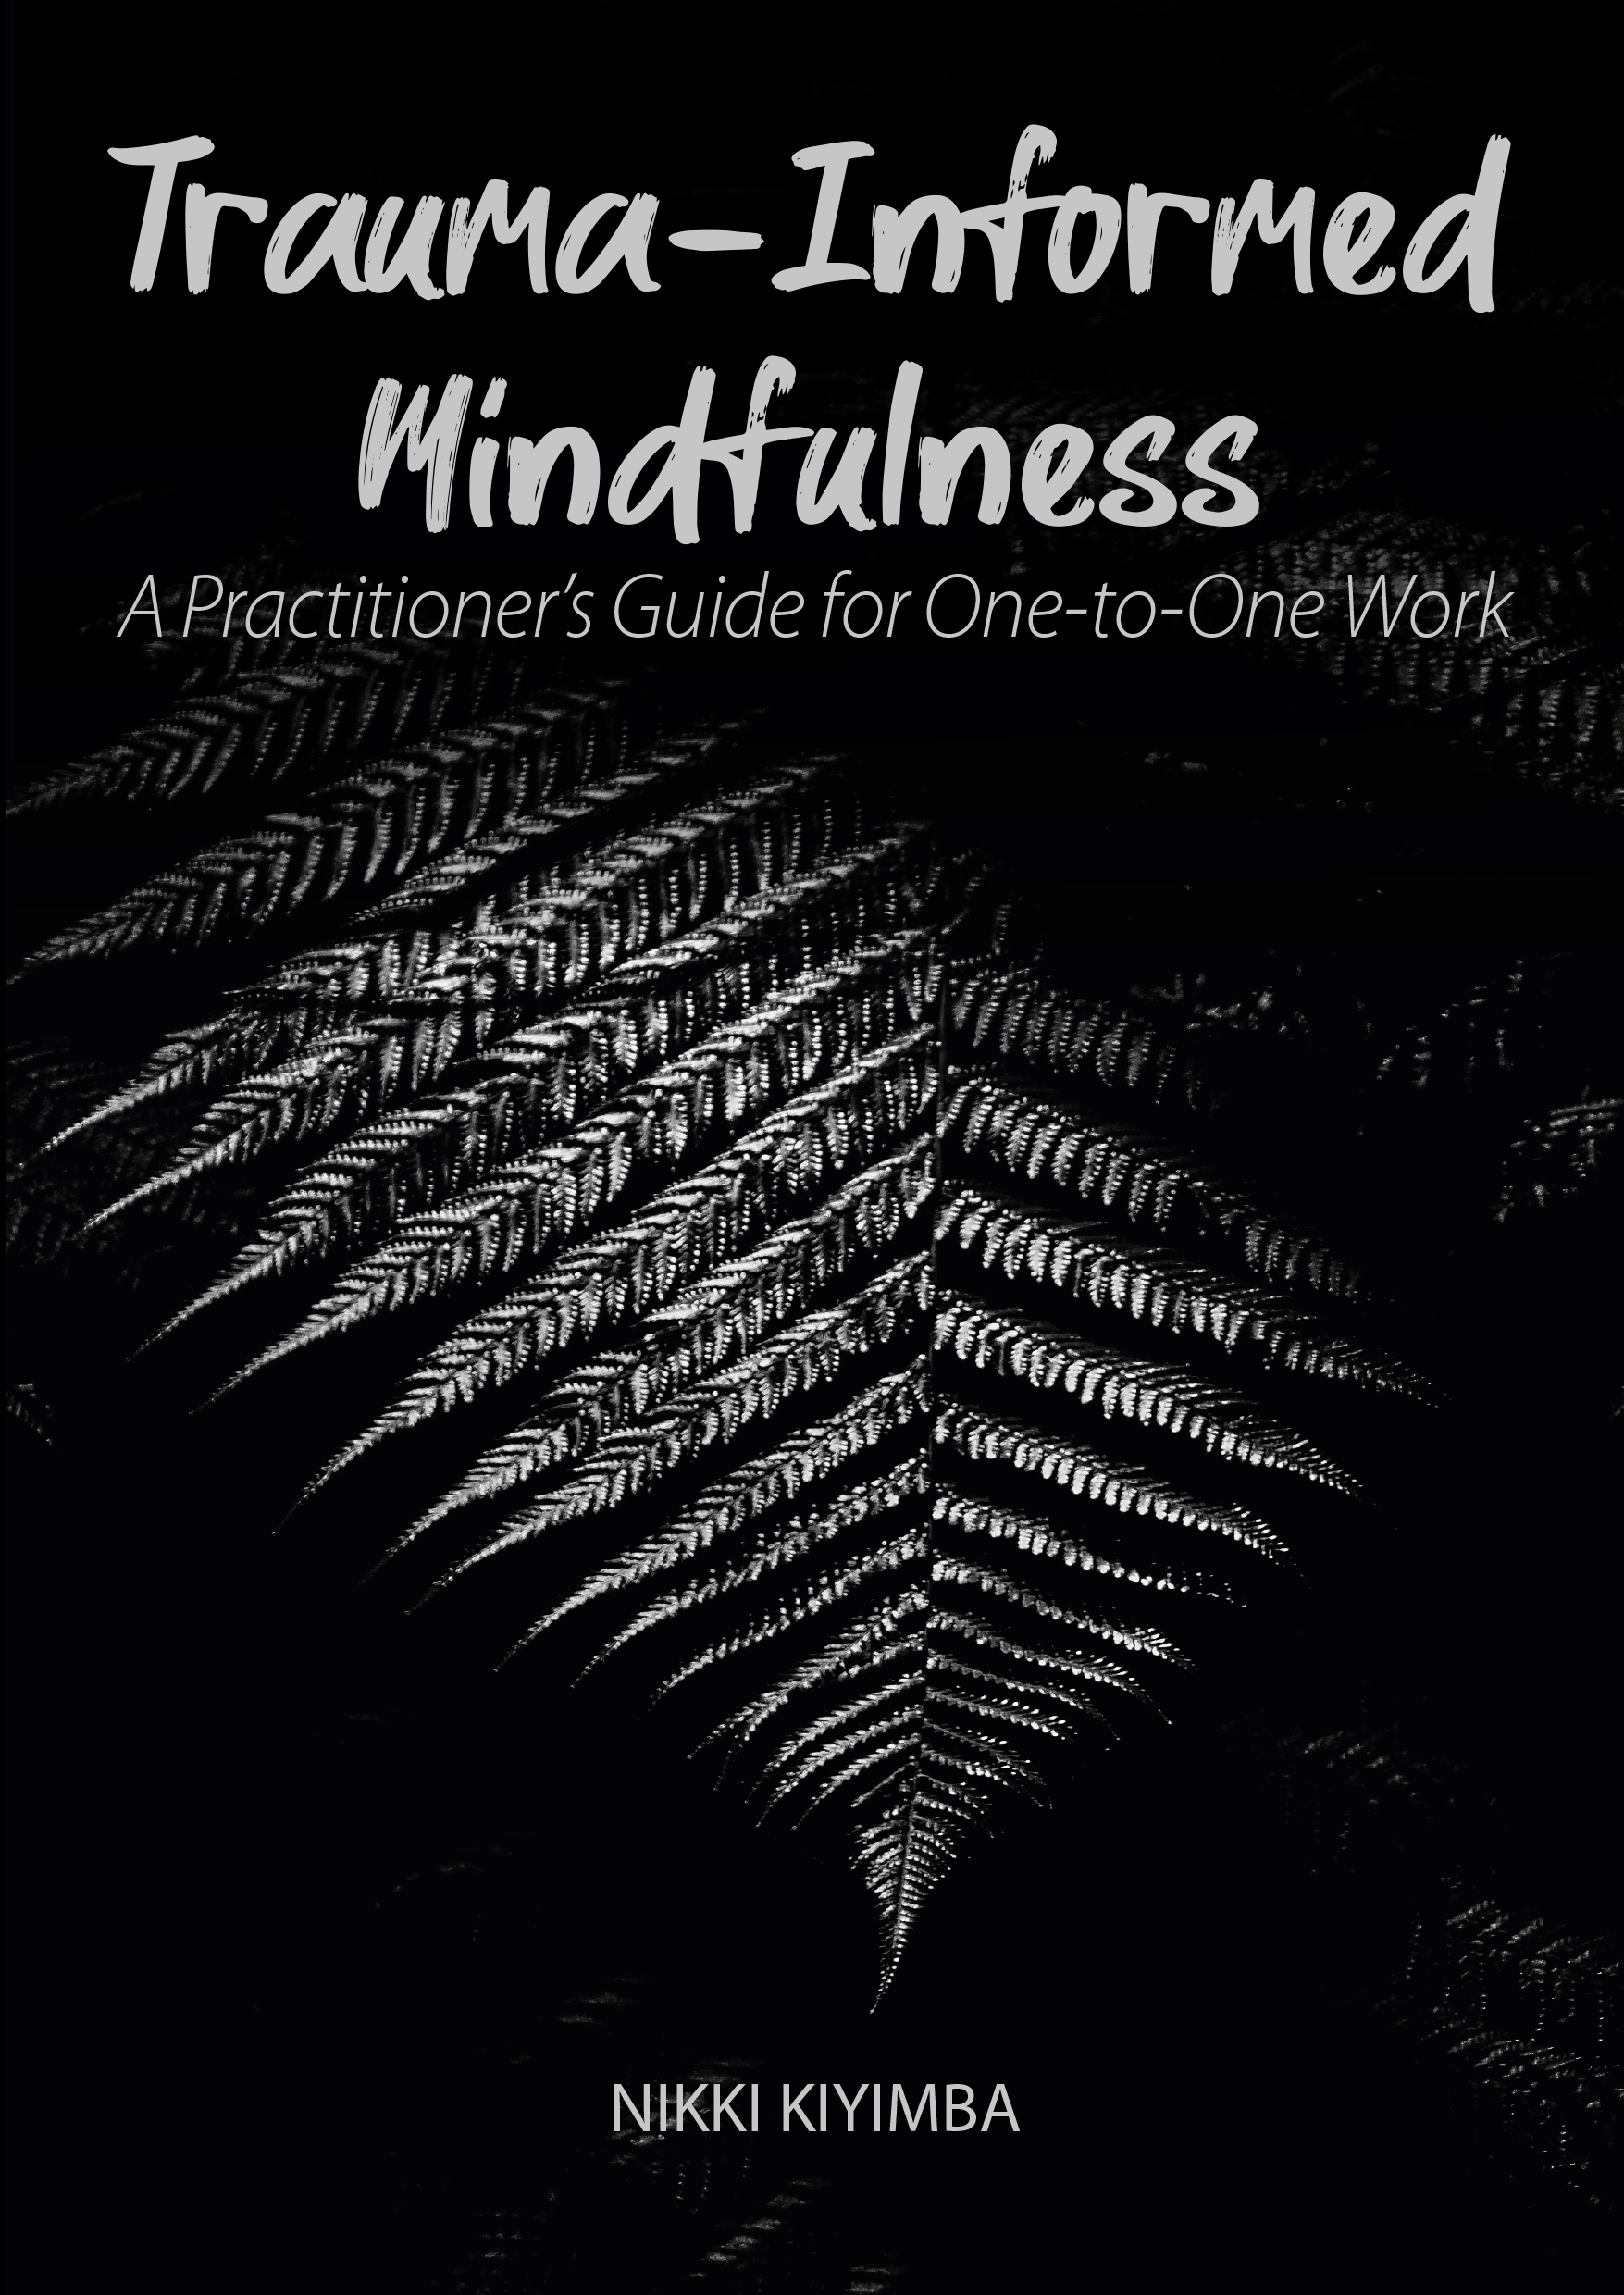 Trauma-Informed Mindfulness: A Practitioner’s Guide for One-to-One Work